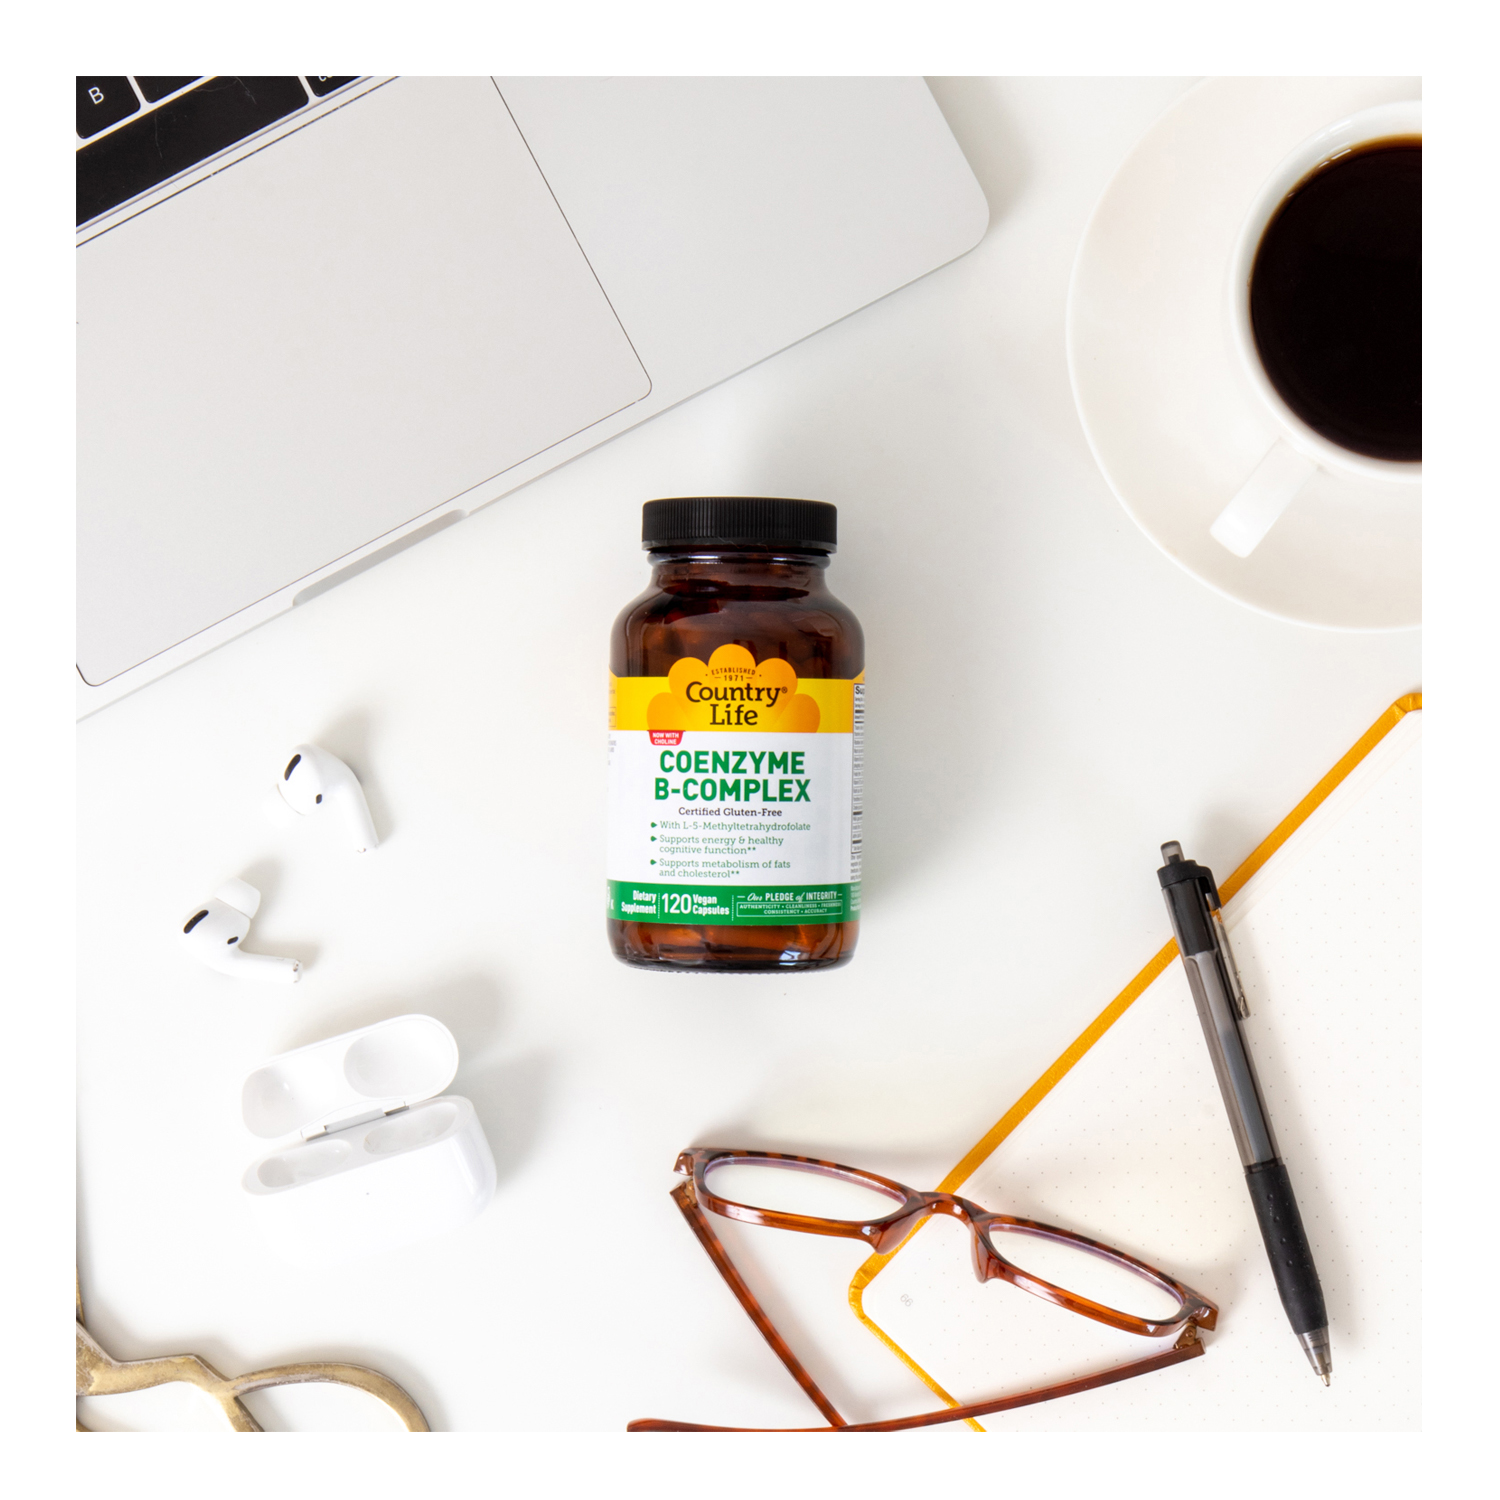 Country Life Vitamins' Coenzyme B-Complex laying on a table